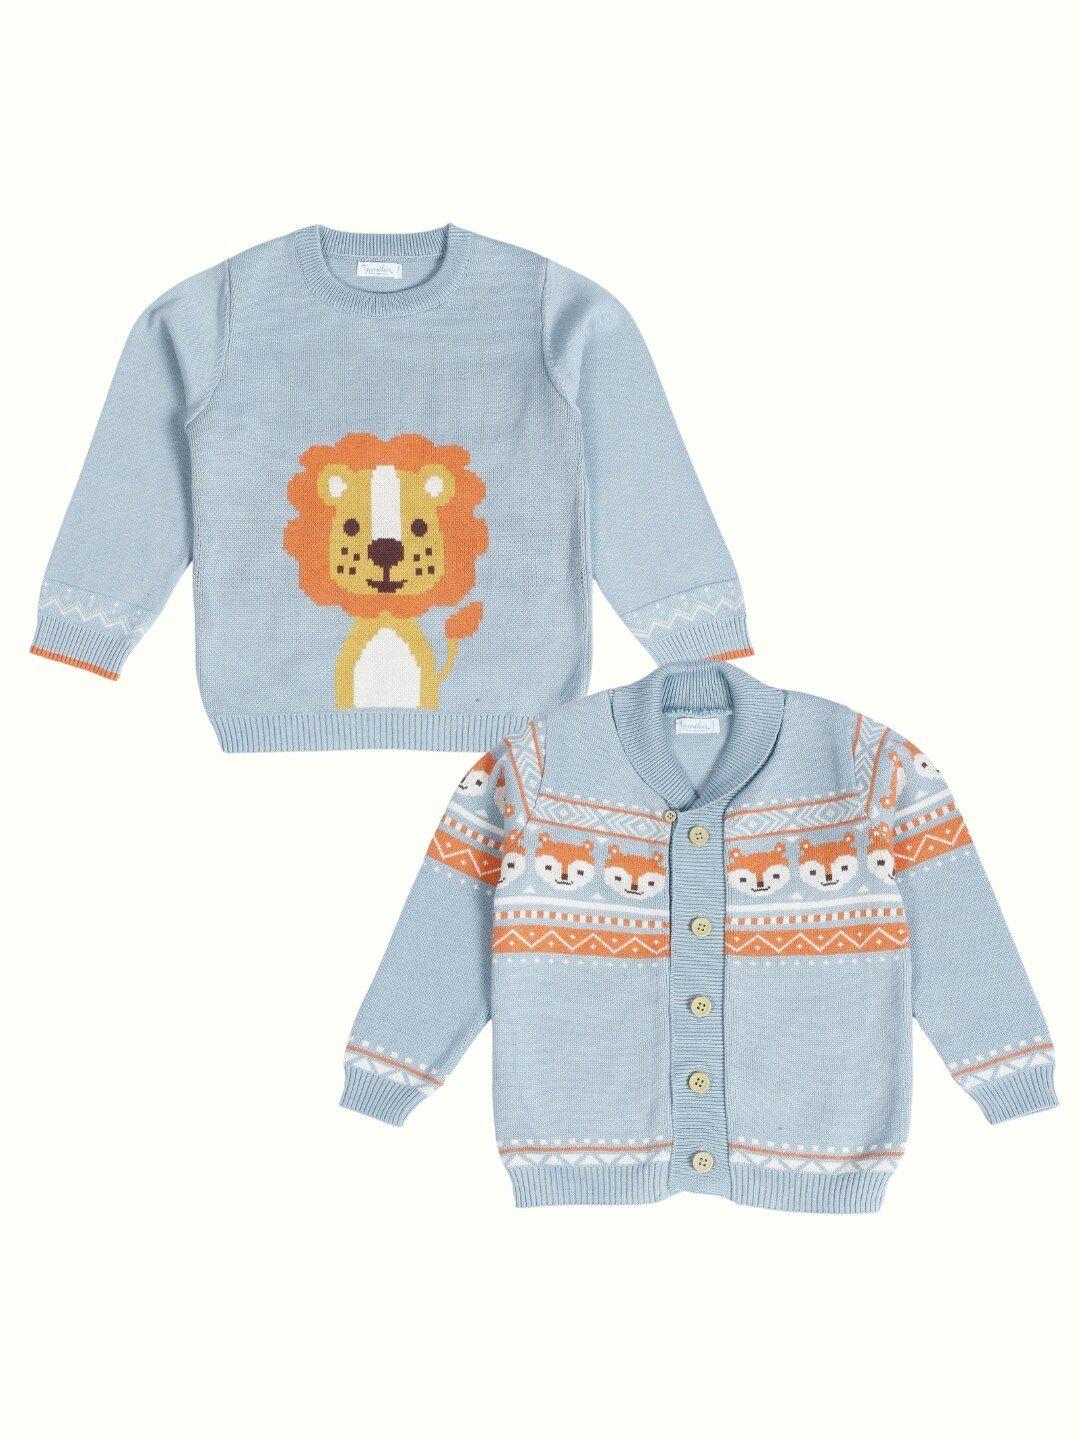 greendeer-kids-pack-of-2-graphic-self-design-pure-cotton-pullover